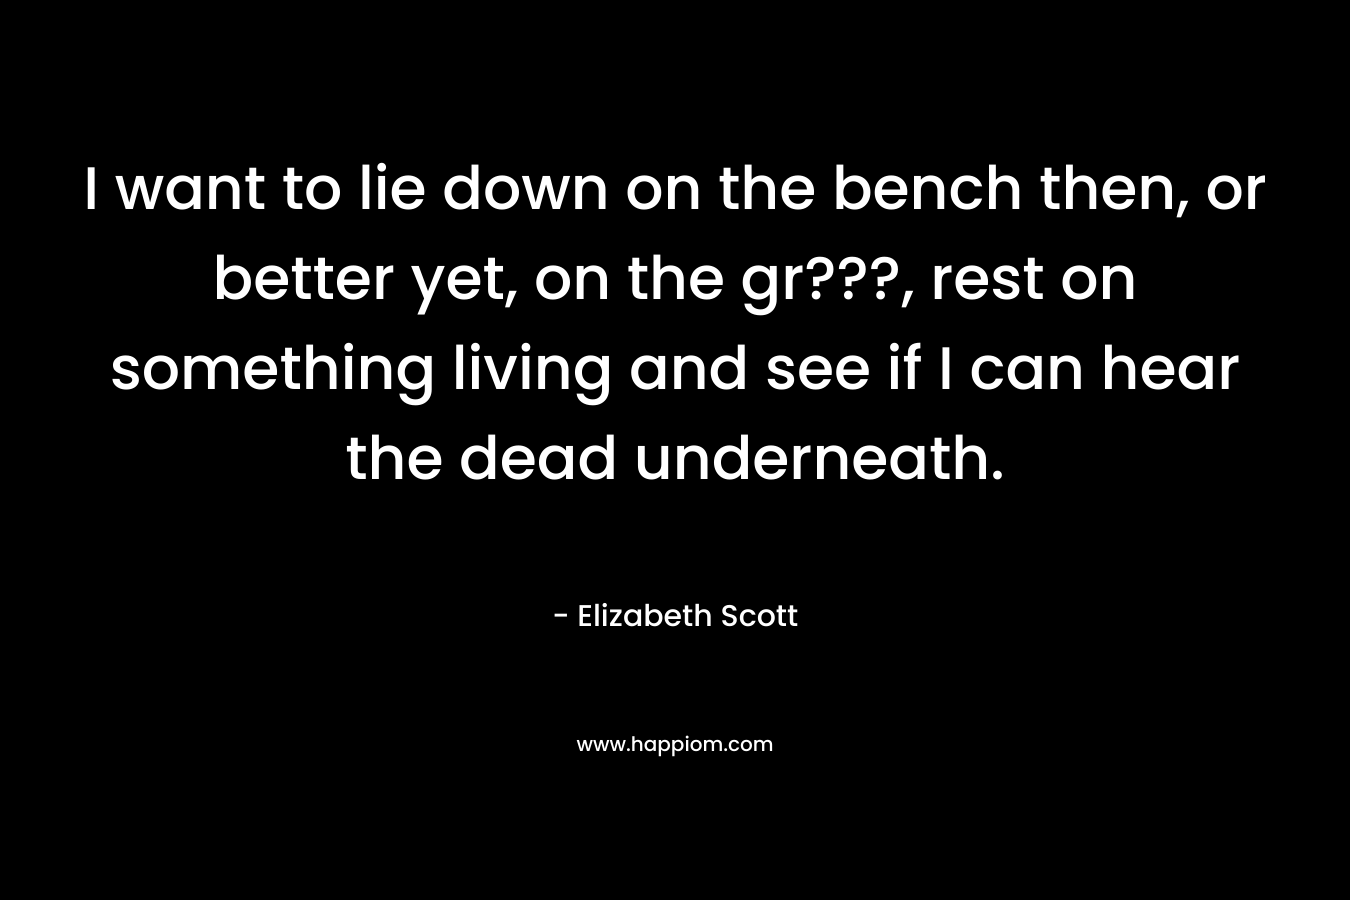 I want to lie down on the bench then, or better yet, on the gr???, rest on something living and see if I can hear the dead underneath. – Elizabeth Scott